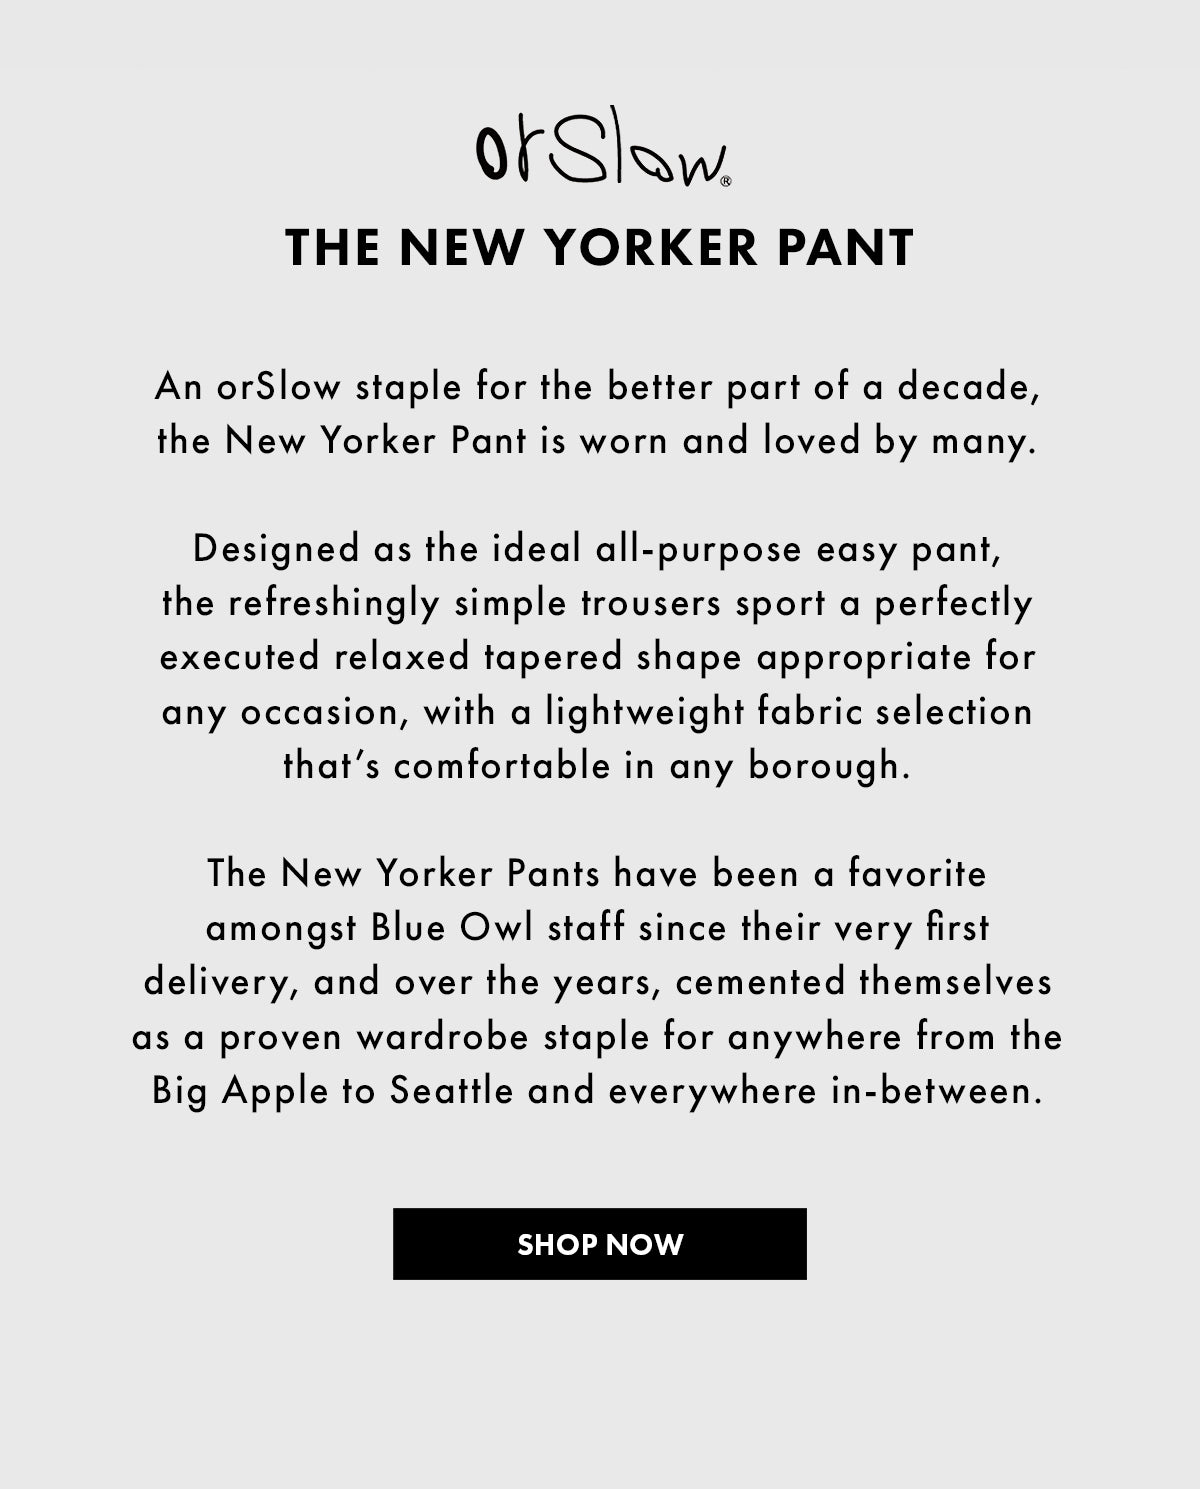 orSlow New Yorker Pants on Sale